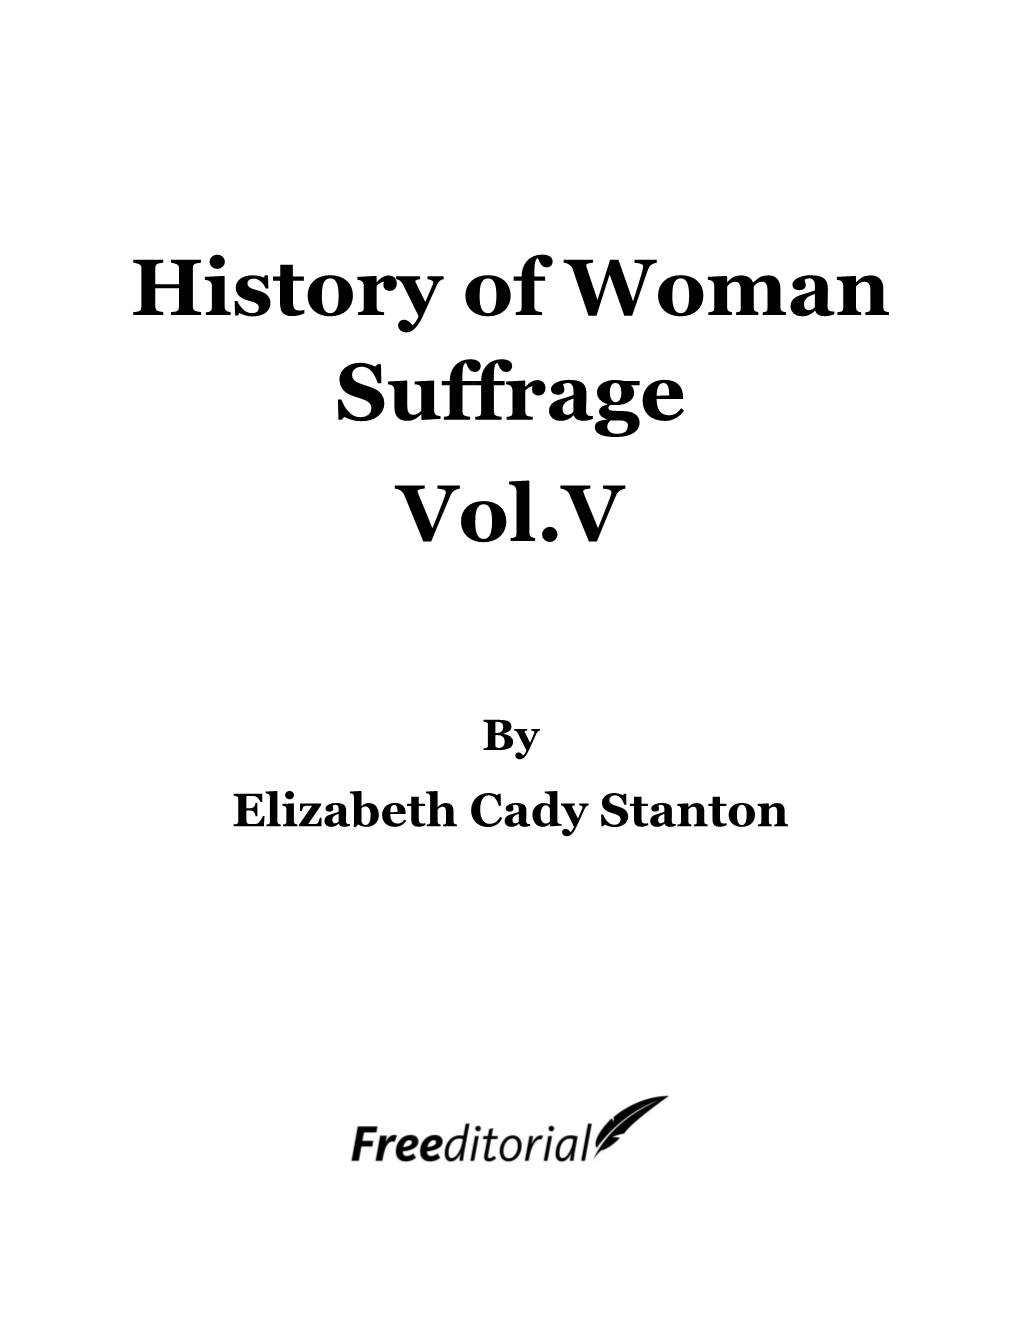 History of Woman Suffrage Vol.V